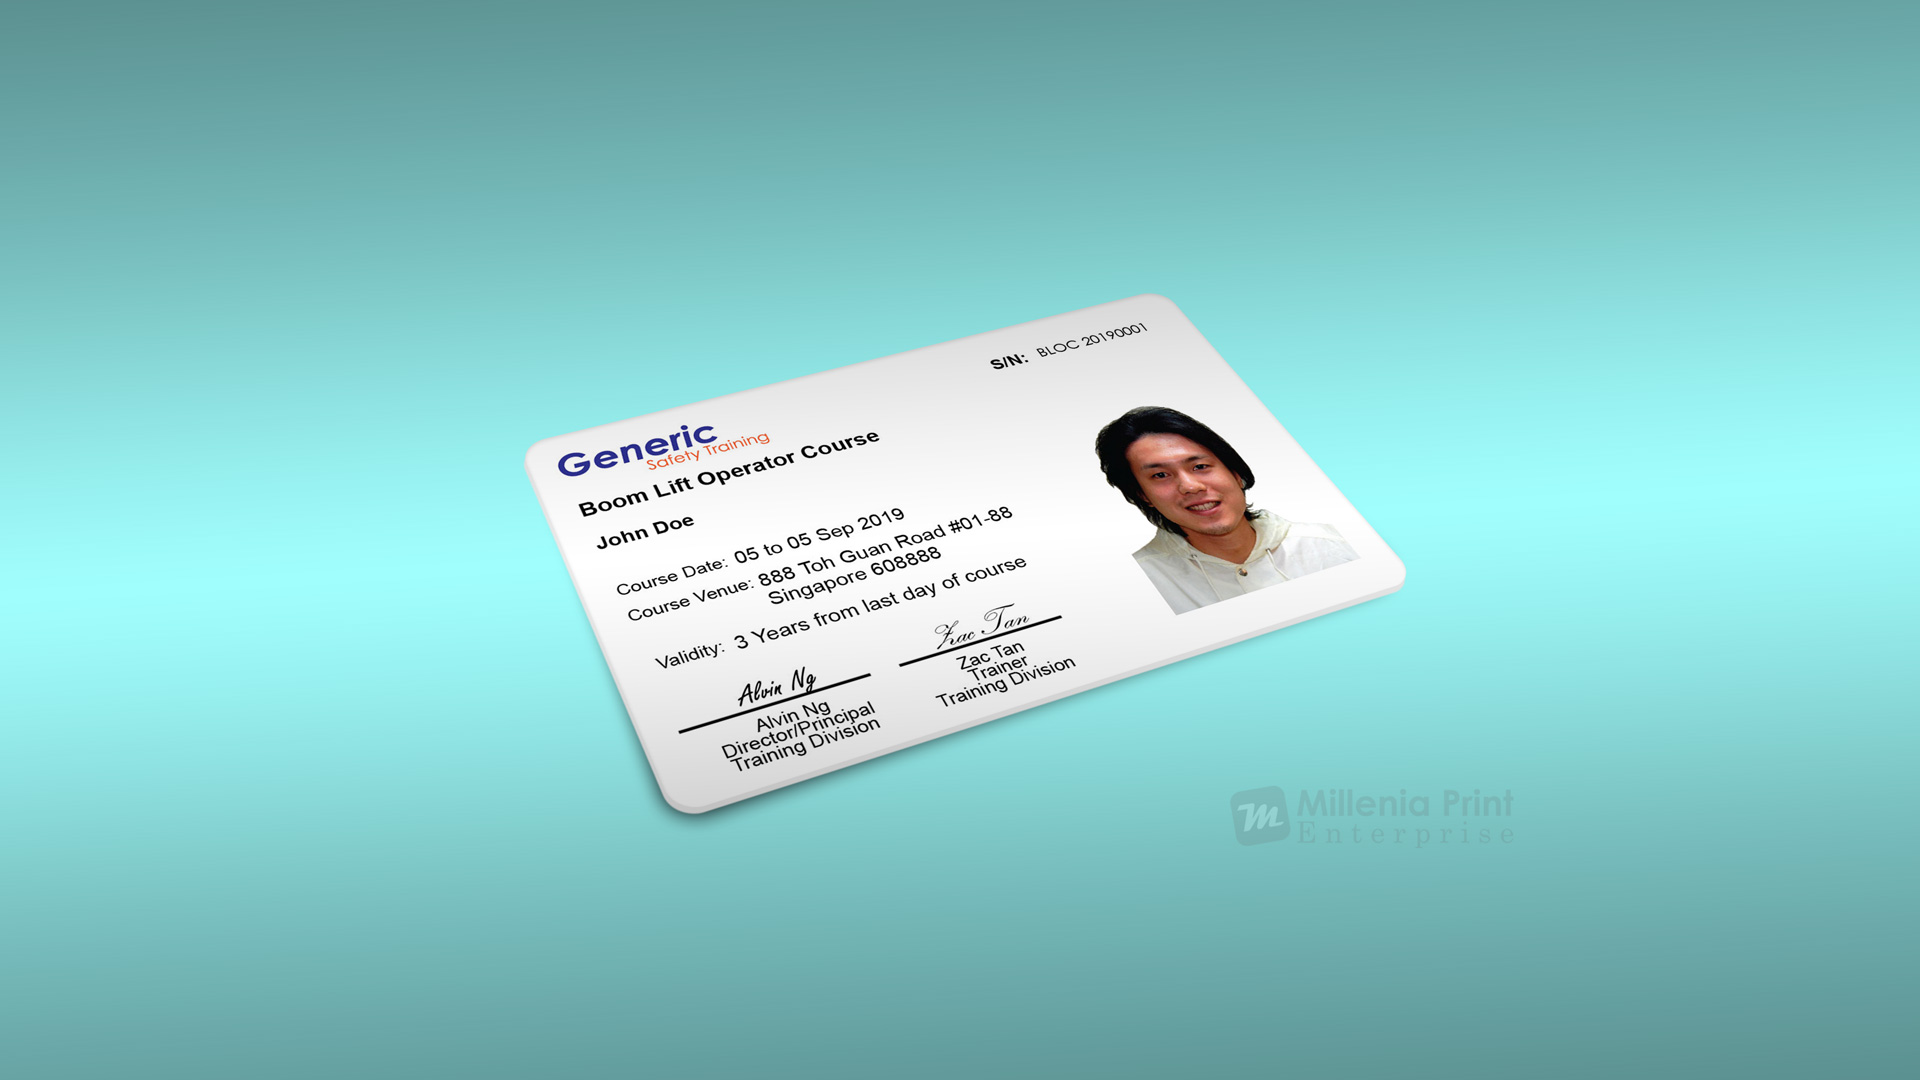 Workplace Safety & Health WSH Training Certification Card